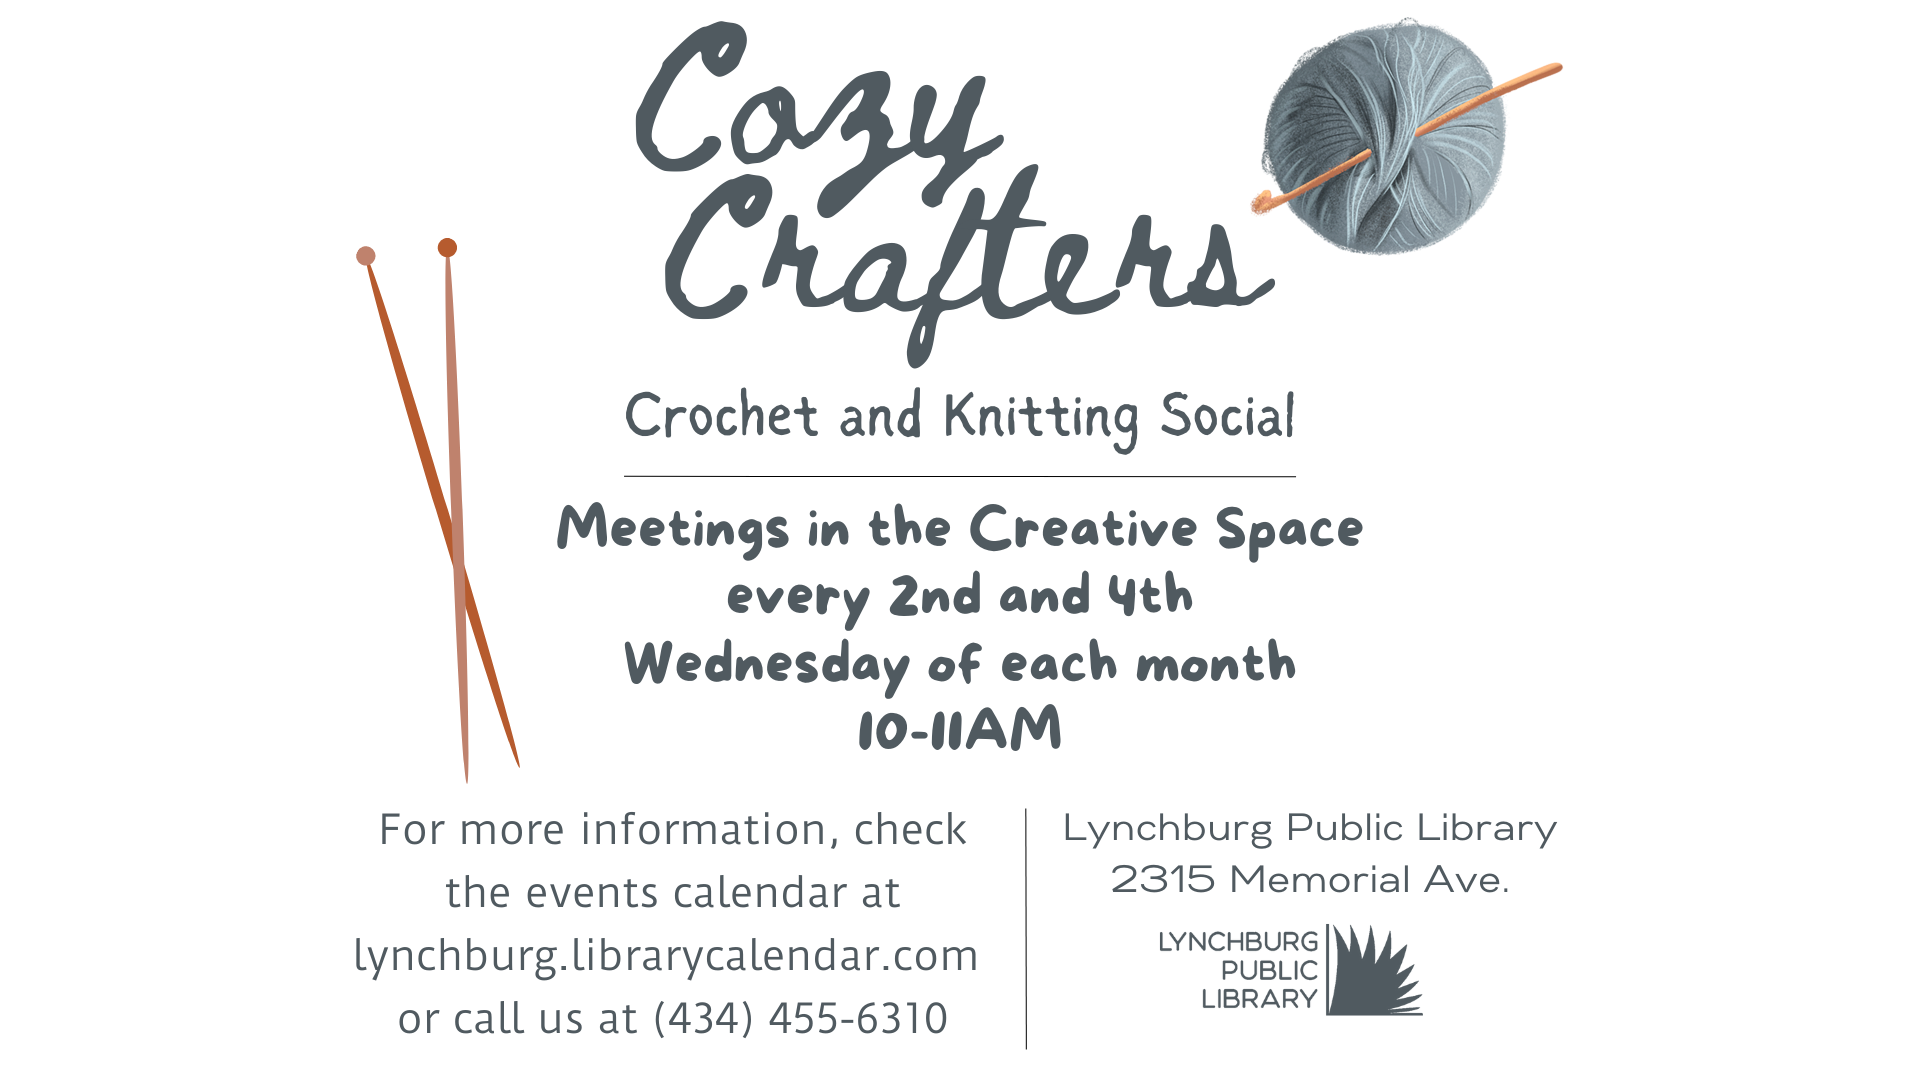 Welcomes all yarn crafters to bring their projects and a friend  every 2nd and 4th Wednesday of the month,  10-11 am in the Creative Space at 2315 Memorial Avenue